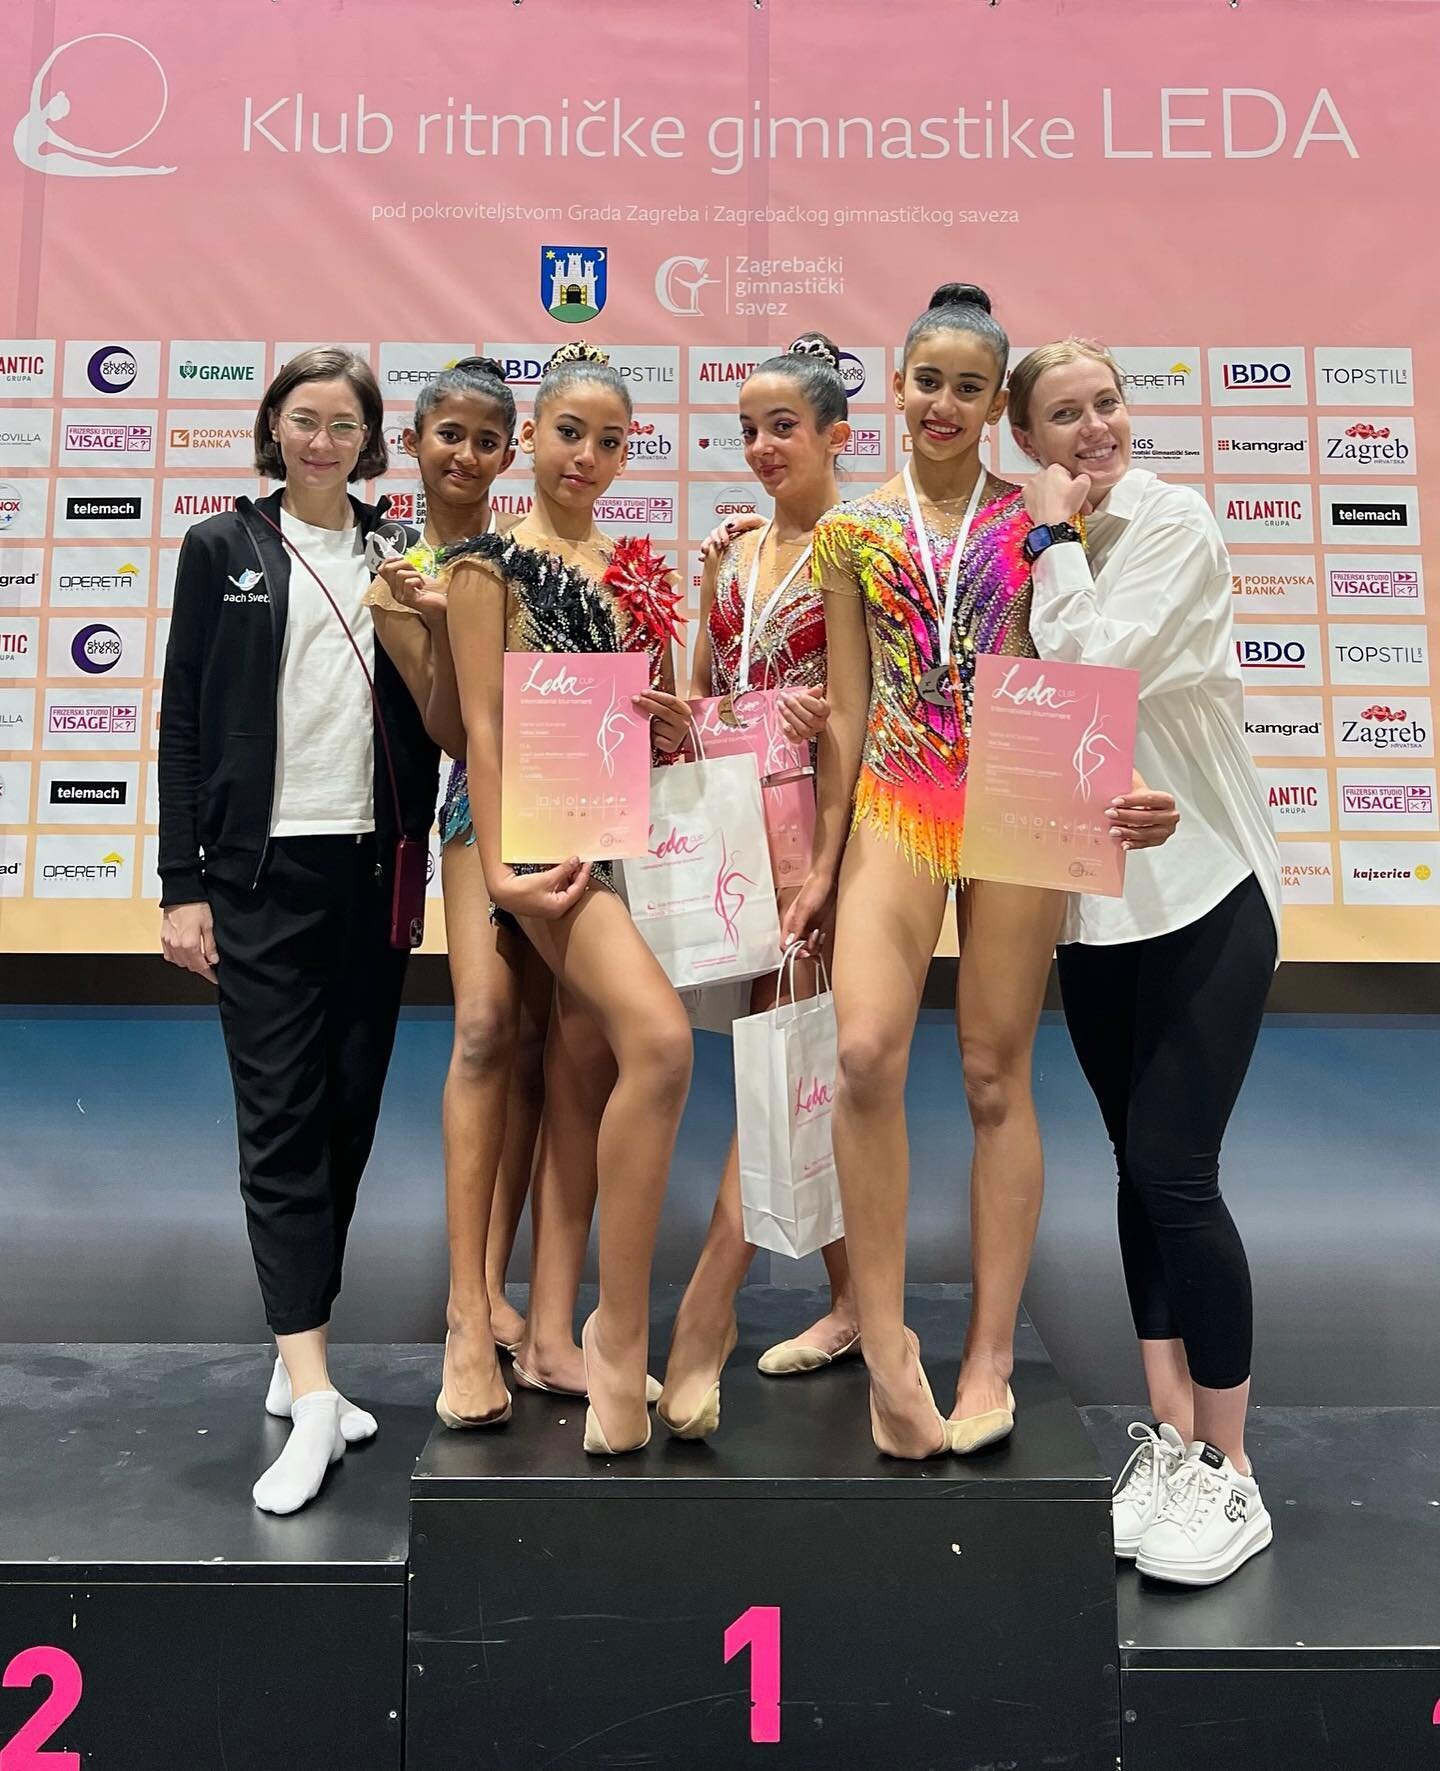 Leda Cup 2023🏆, Croatia, Zagreb 🇭🇷 

It was a high-level competition with 17 countries, 39 clubs, and 570 gymnasts. All our gymnasts showed good results, and in total, we won:🥇🥇🥇🥇🥇🥈🥉

Thank you, @krgledacroatia for the competition❤️. We wer